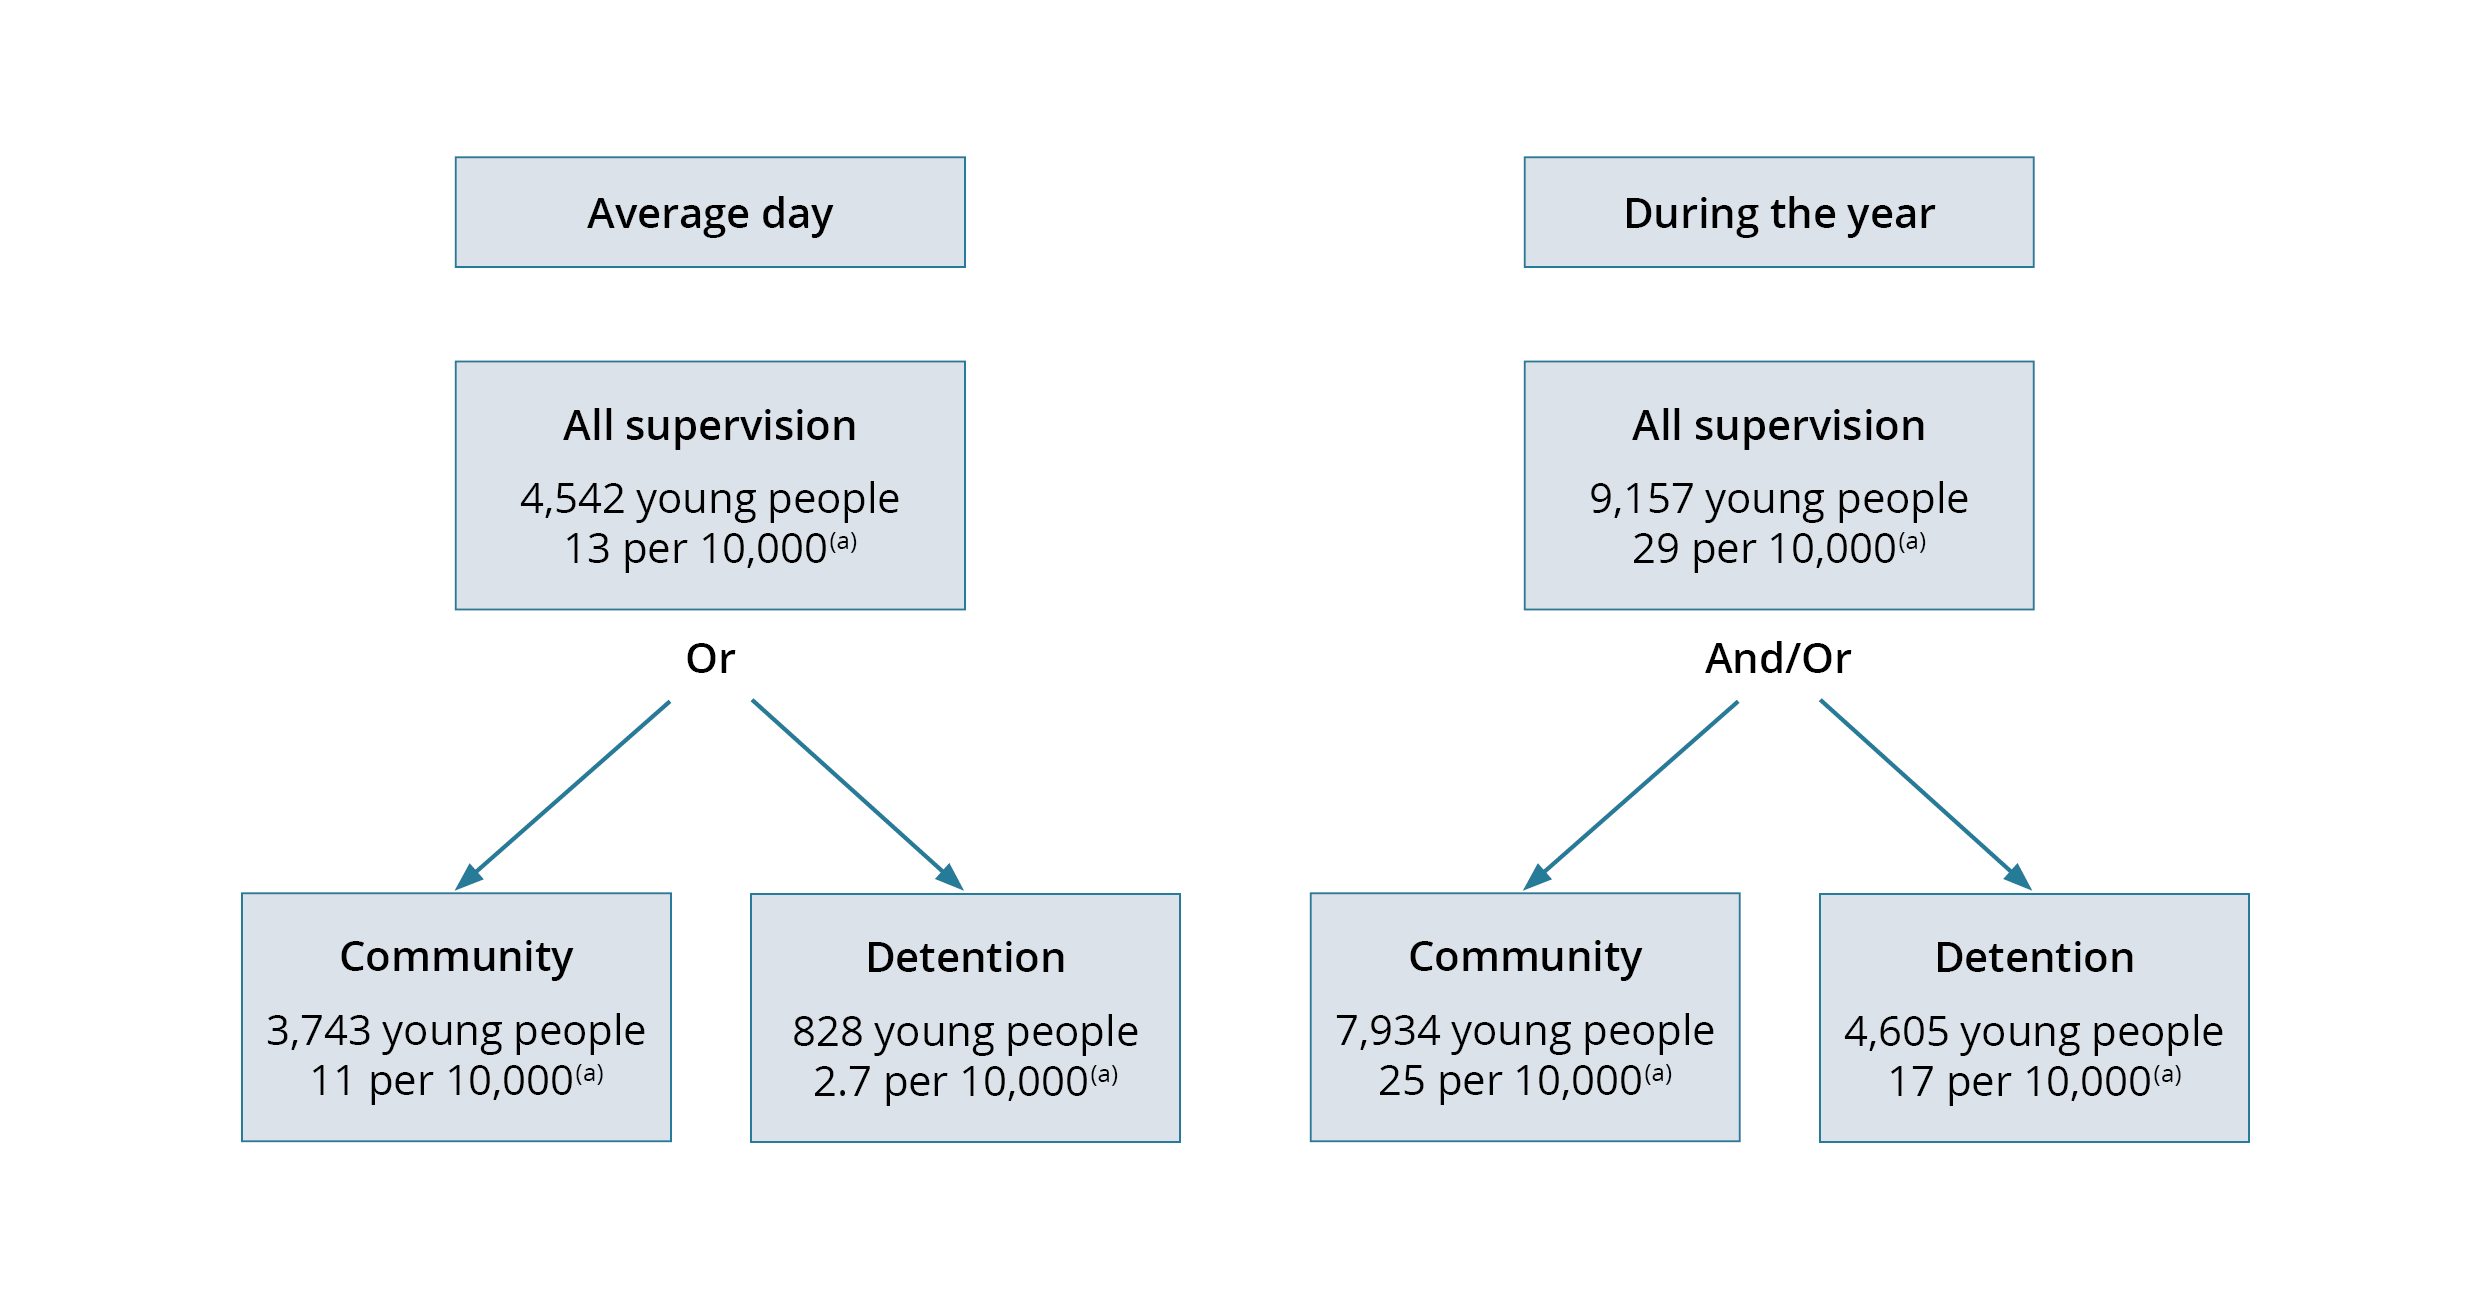 This figure shows two flowcharts with the number and rate of young people under all types of youth justice supervision on an average day and during the year. There were 4,542 young people under supervision on an average day and 9,157 young people under supervision during the year.